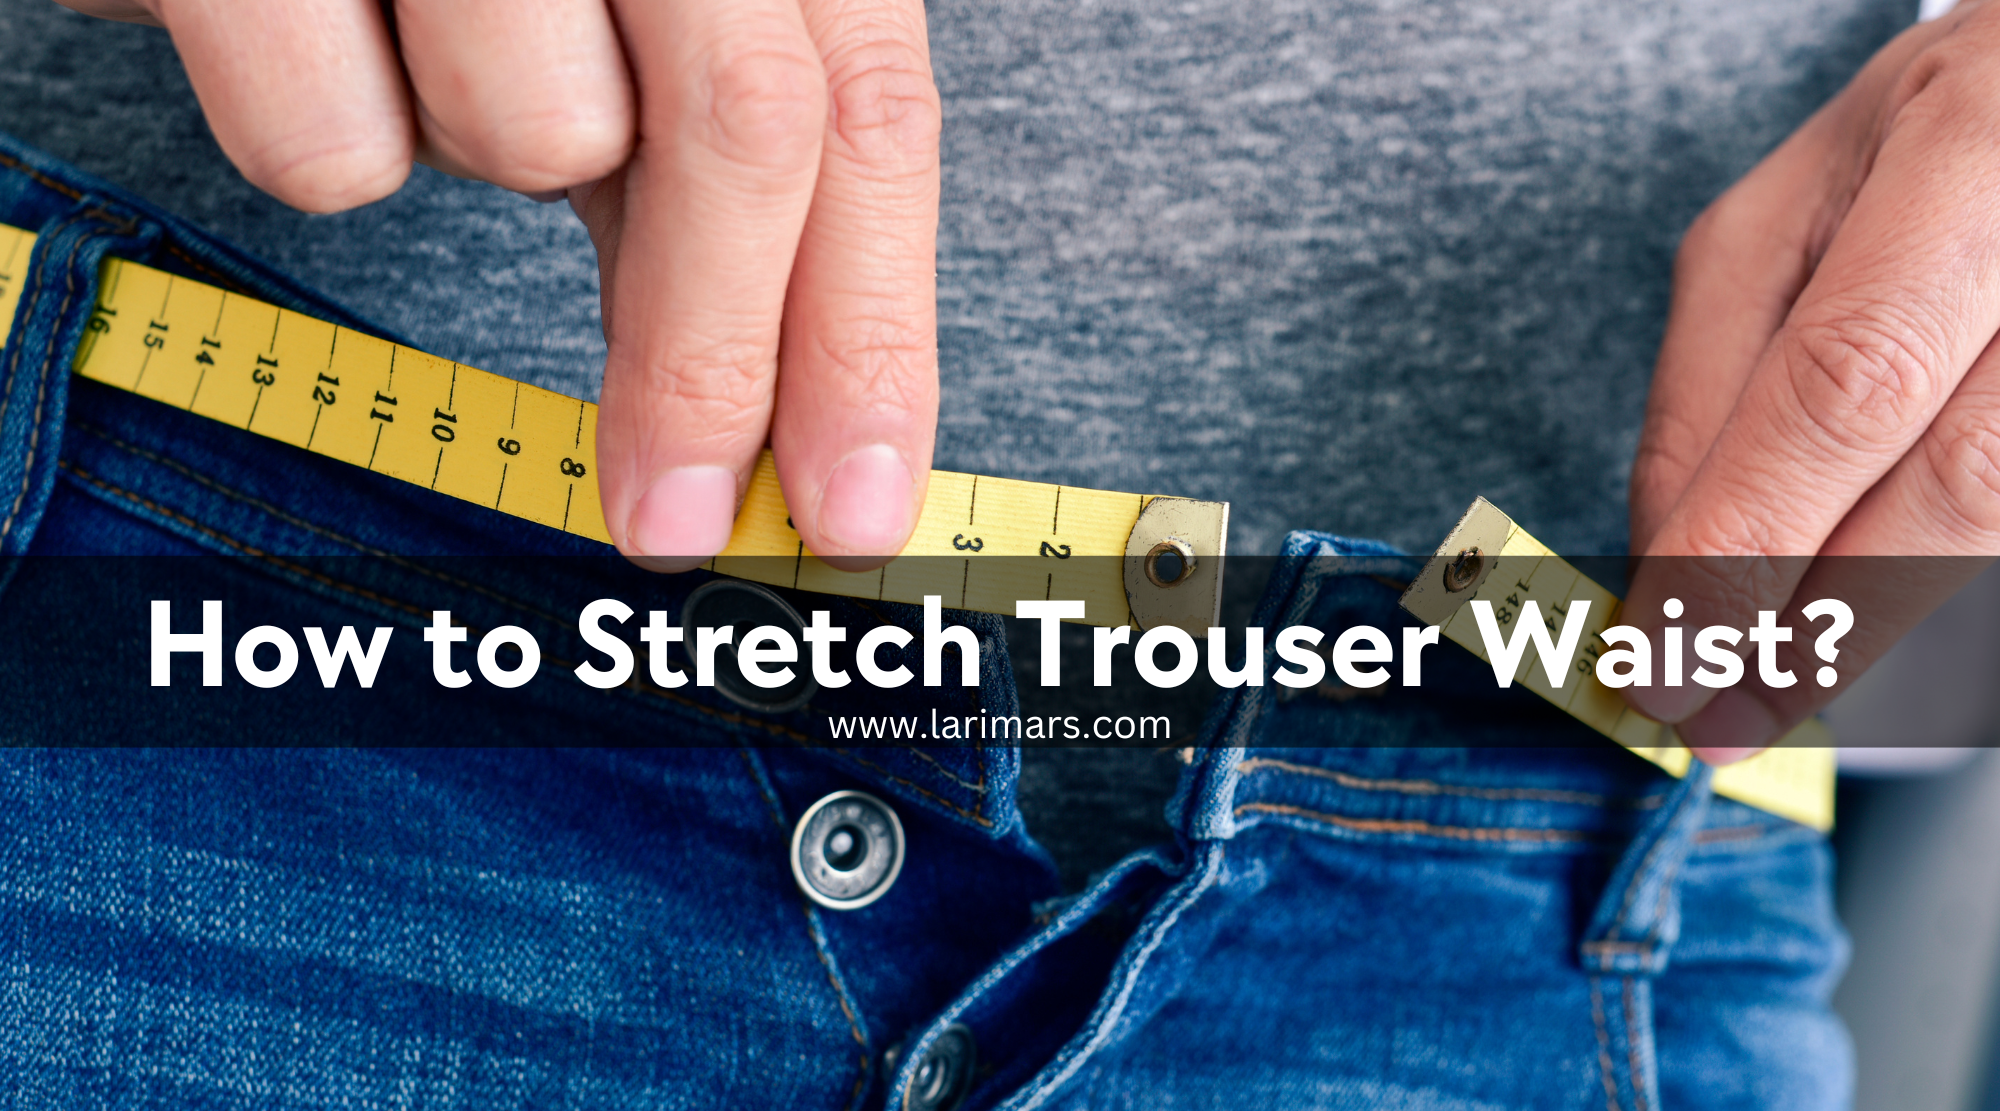 How to Stretch Trouser Waist?